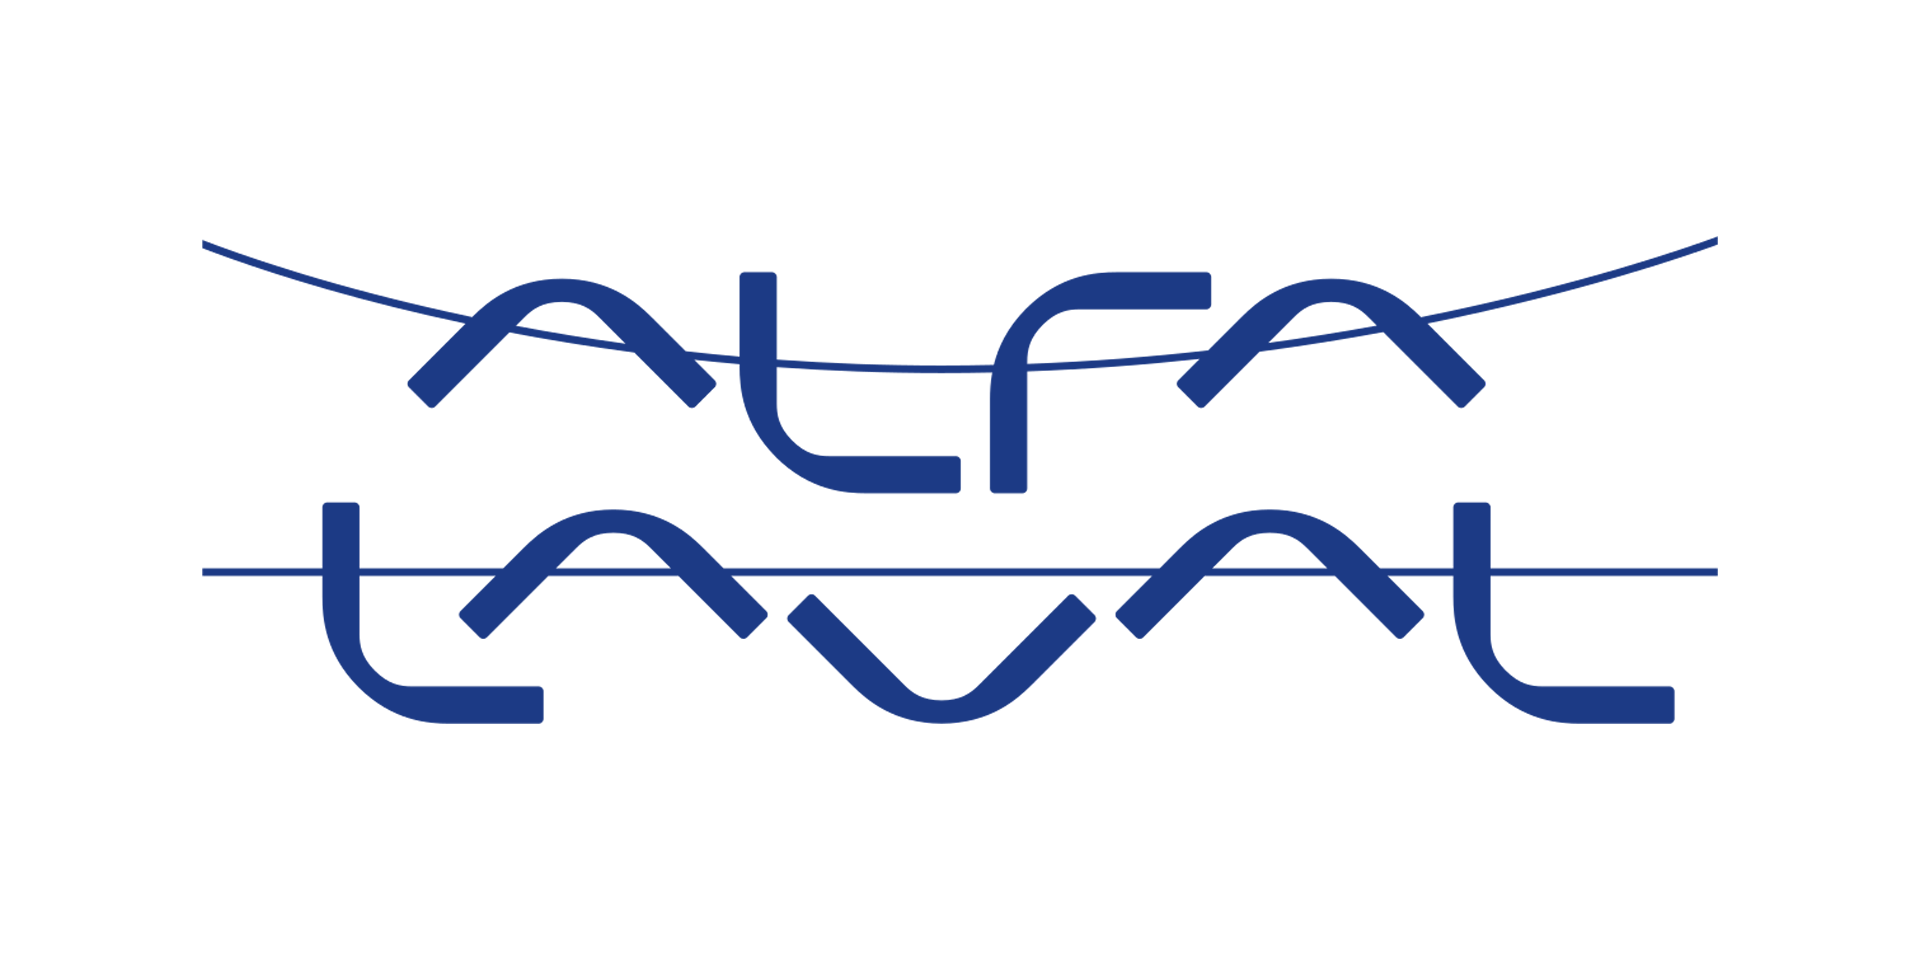 Kyoto and Alfa Laval sign letter of intent